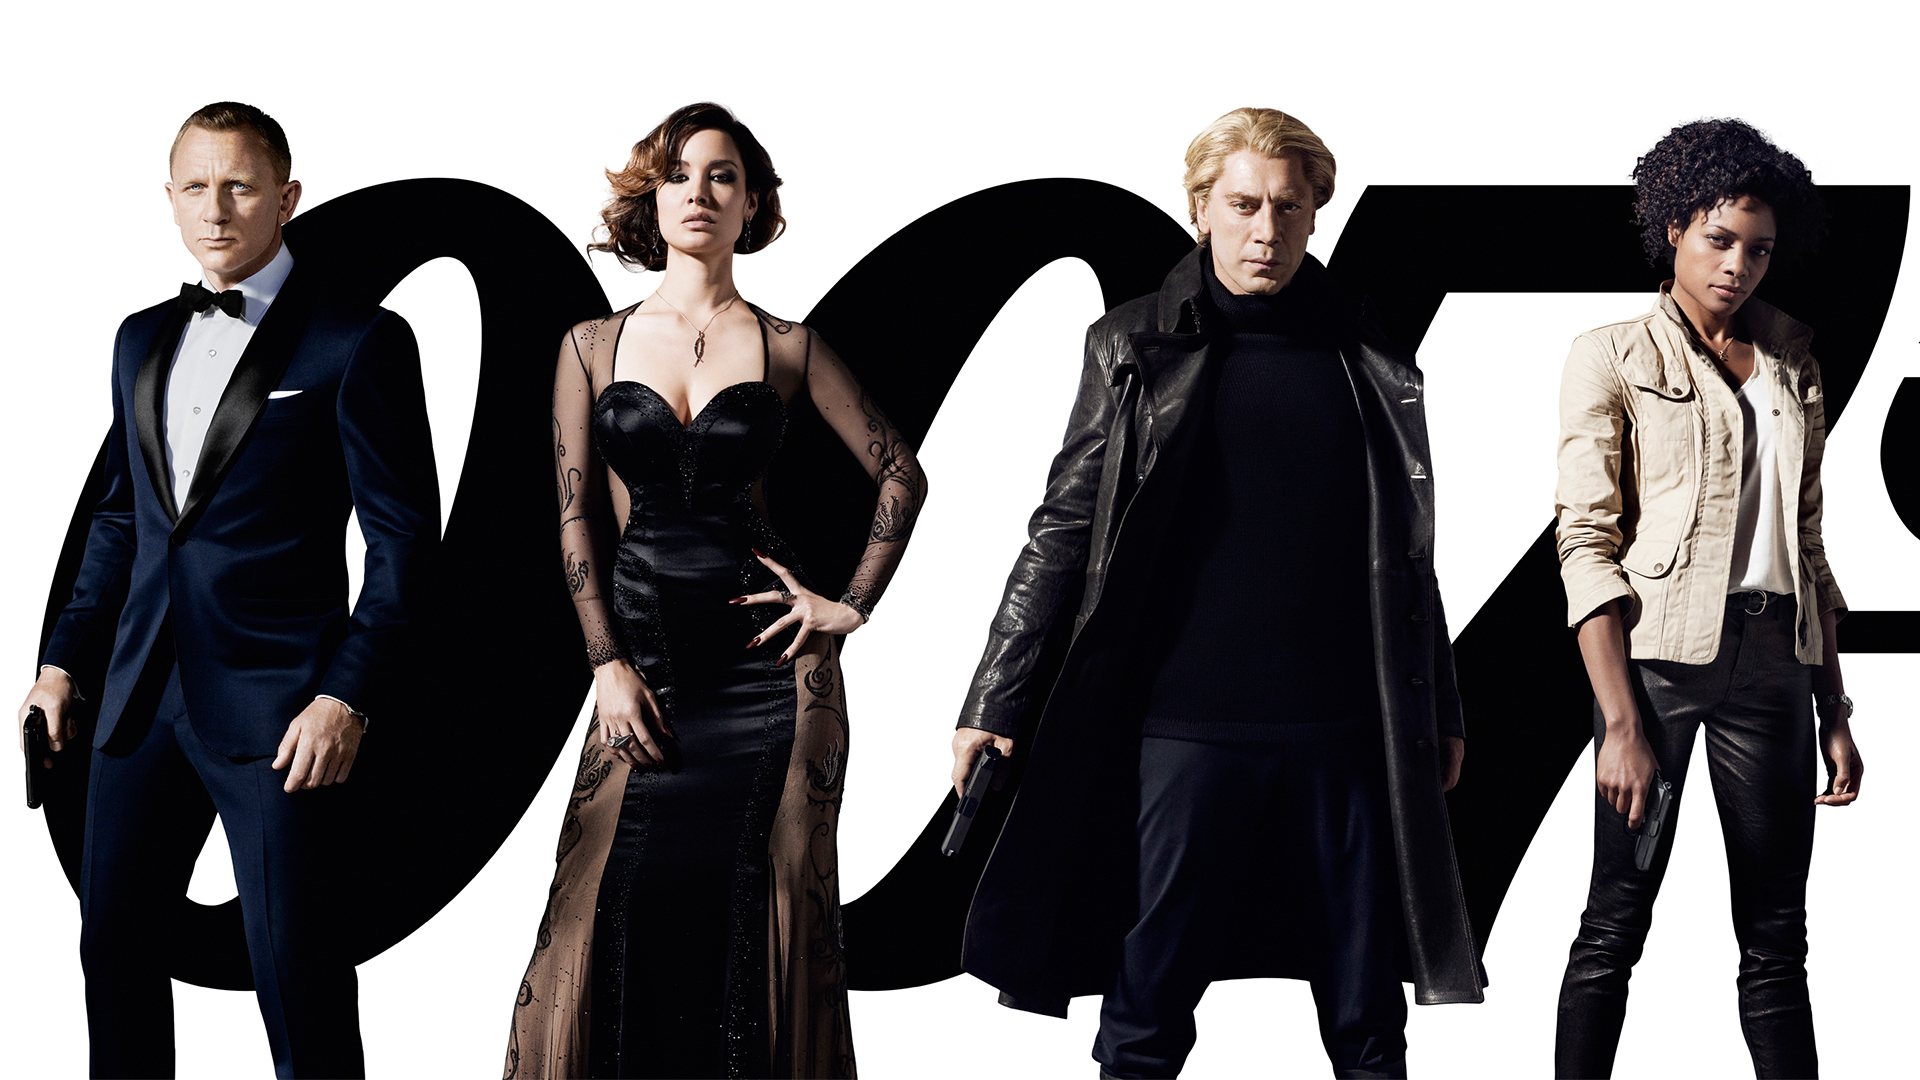 Movie Skyfall HD Wallpaper | Background Image